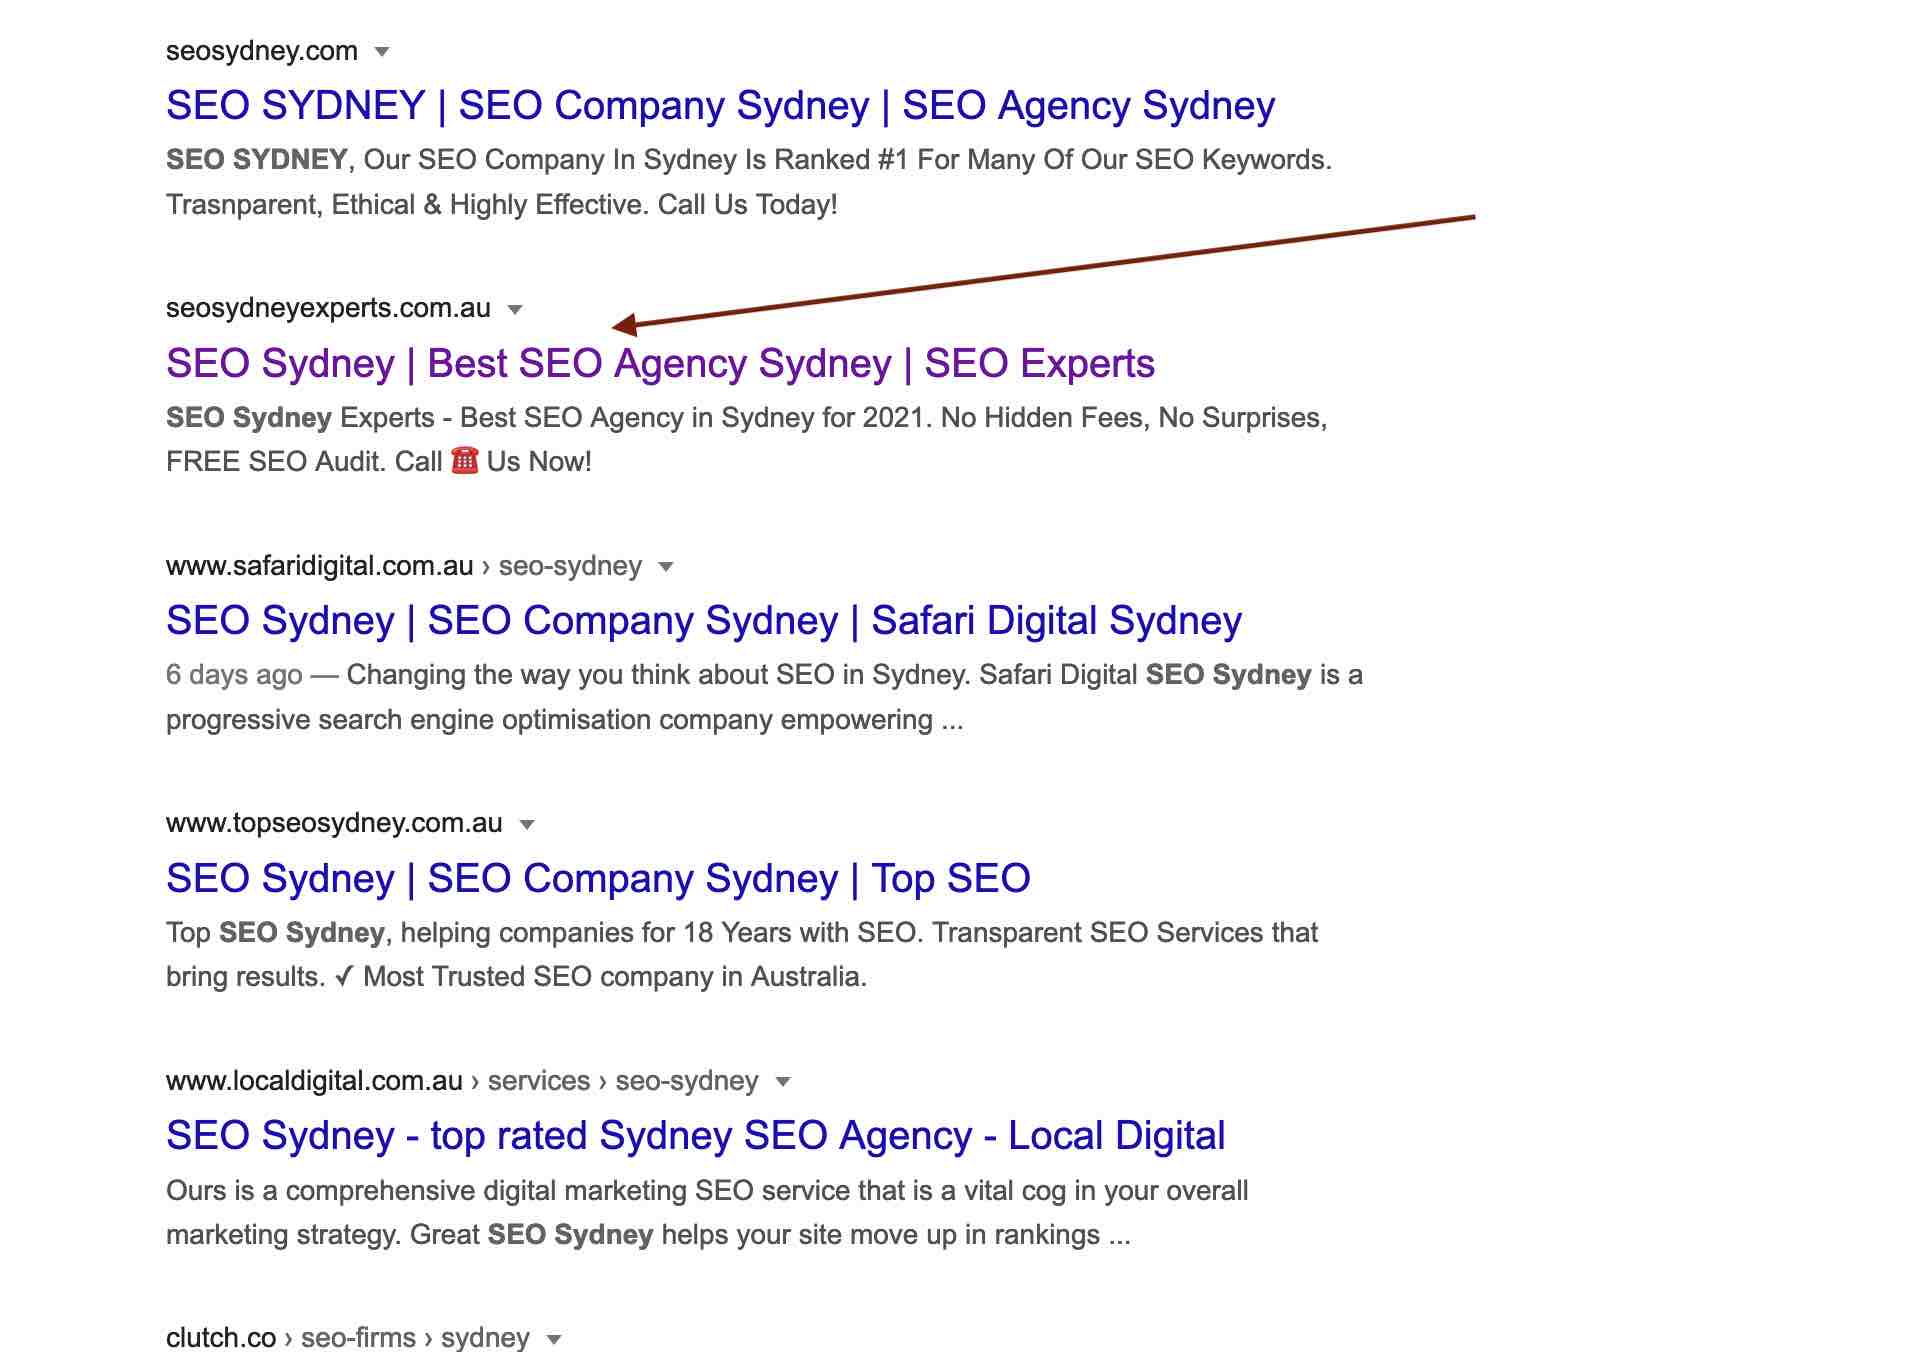 page 1 google results for seo sydney